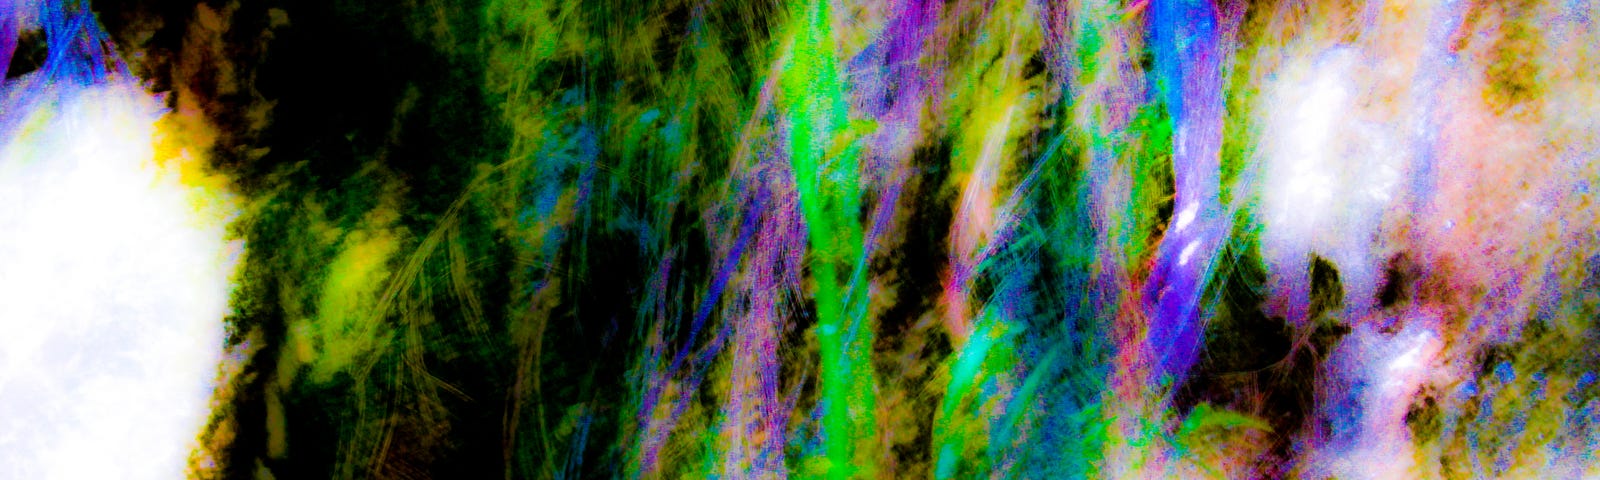 Abstract strongly colors image, with white spots. The colors of life.